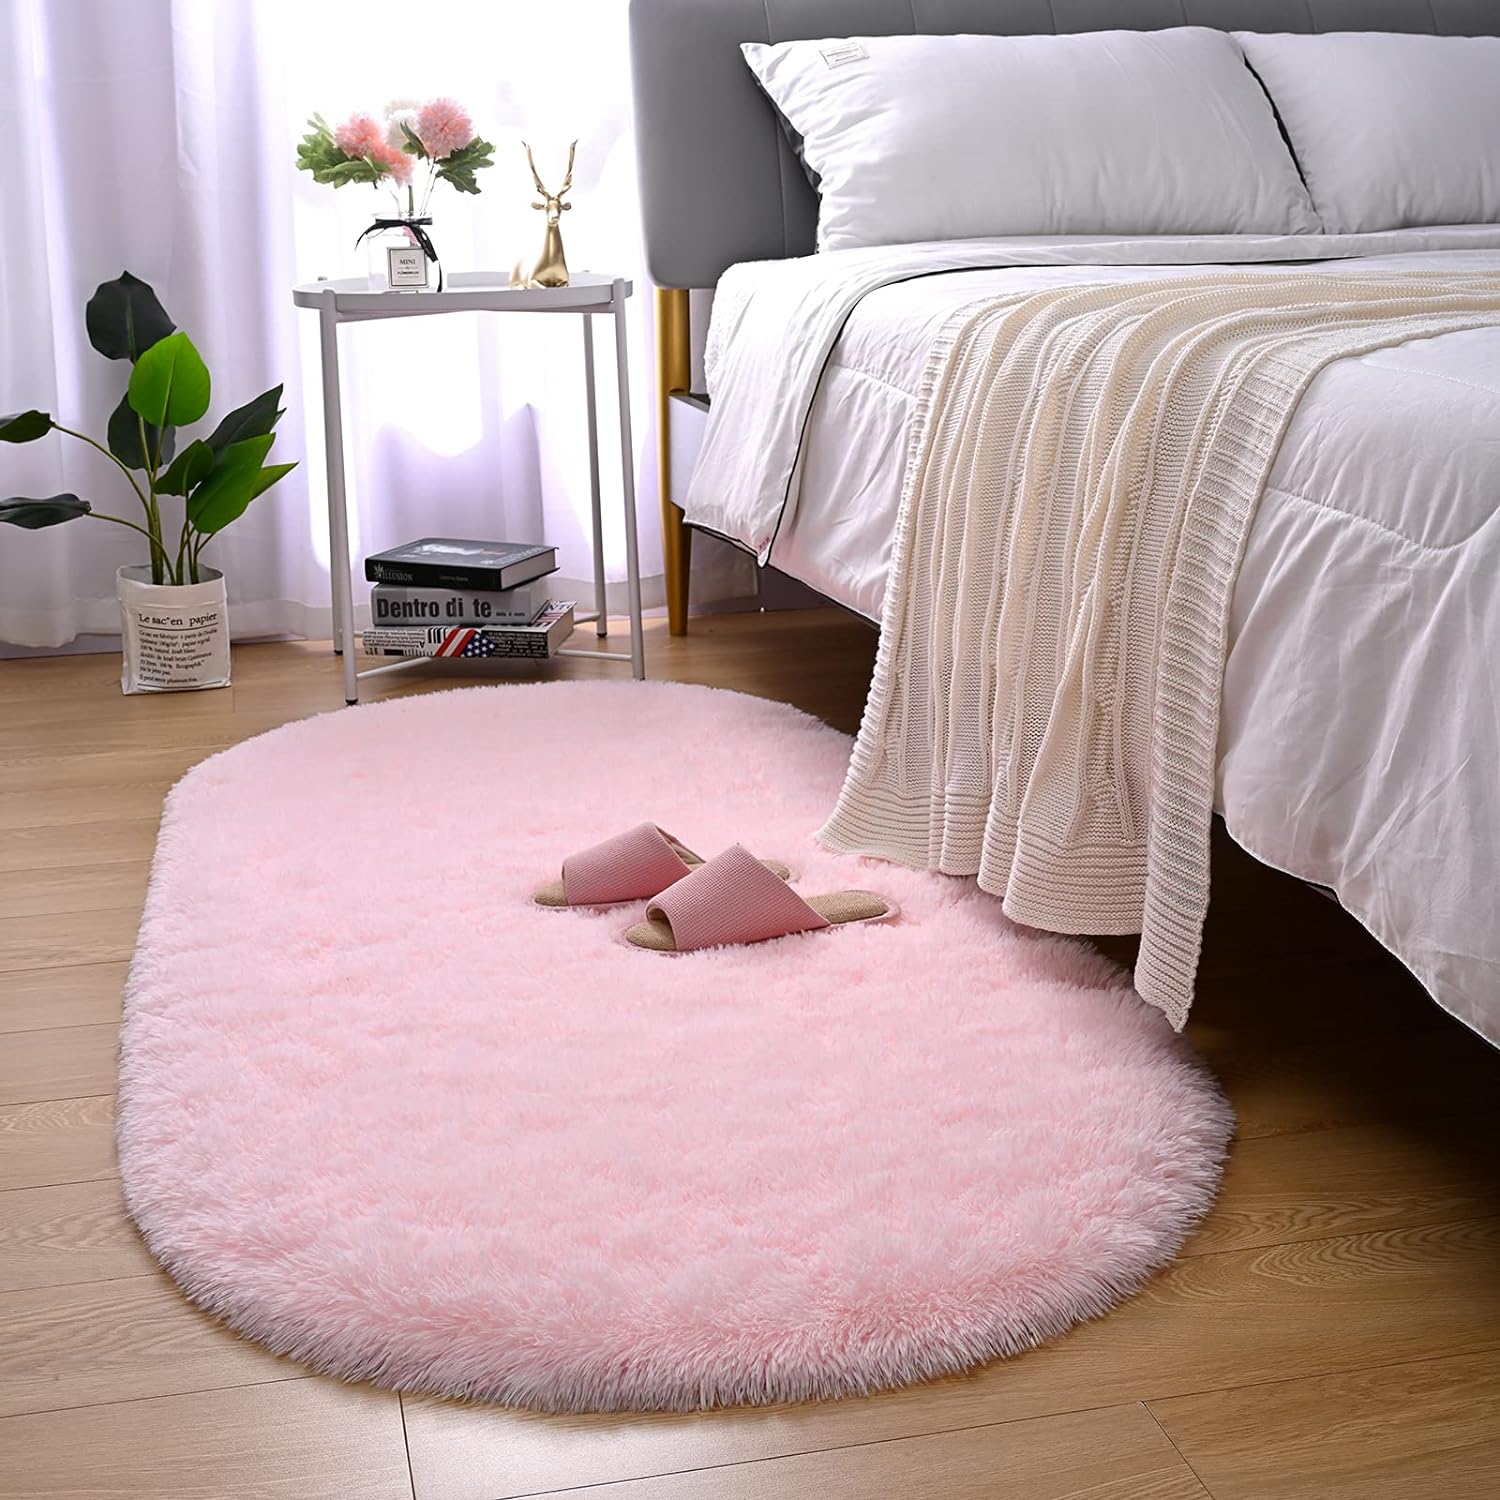 Merelax Soft Shaggy Rug for Kids Bedroom, Oval 2.6'x5.3' Pink Plush Fluffy Furry Carpets for Living Room, Teen Girls Room, Anti-Skid Fuzzy Comfy Rug for Nursery Decor Cute Baby Play Mat